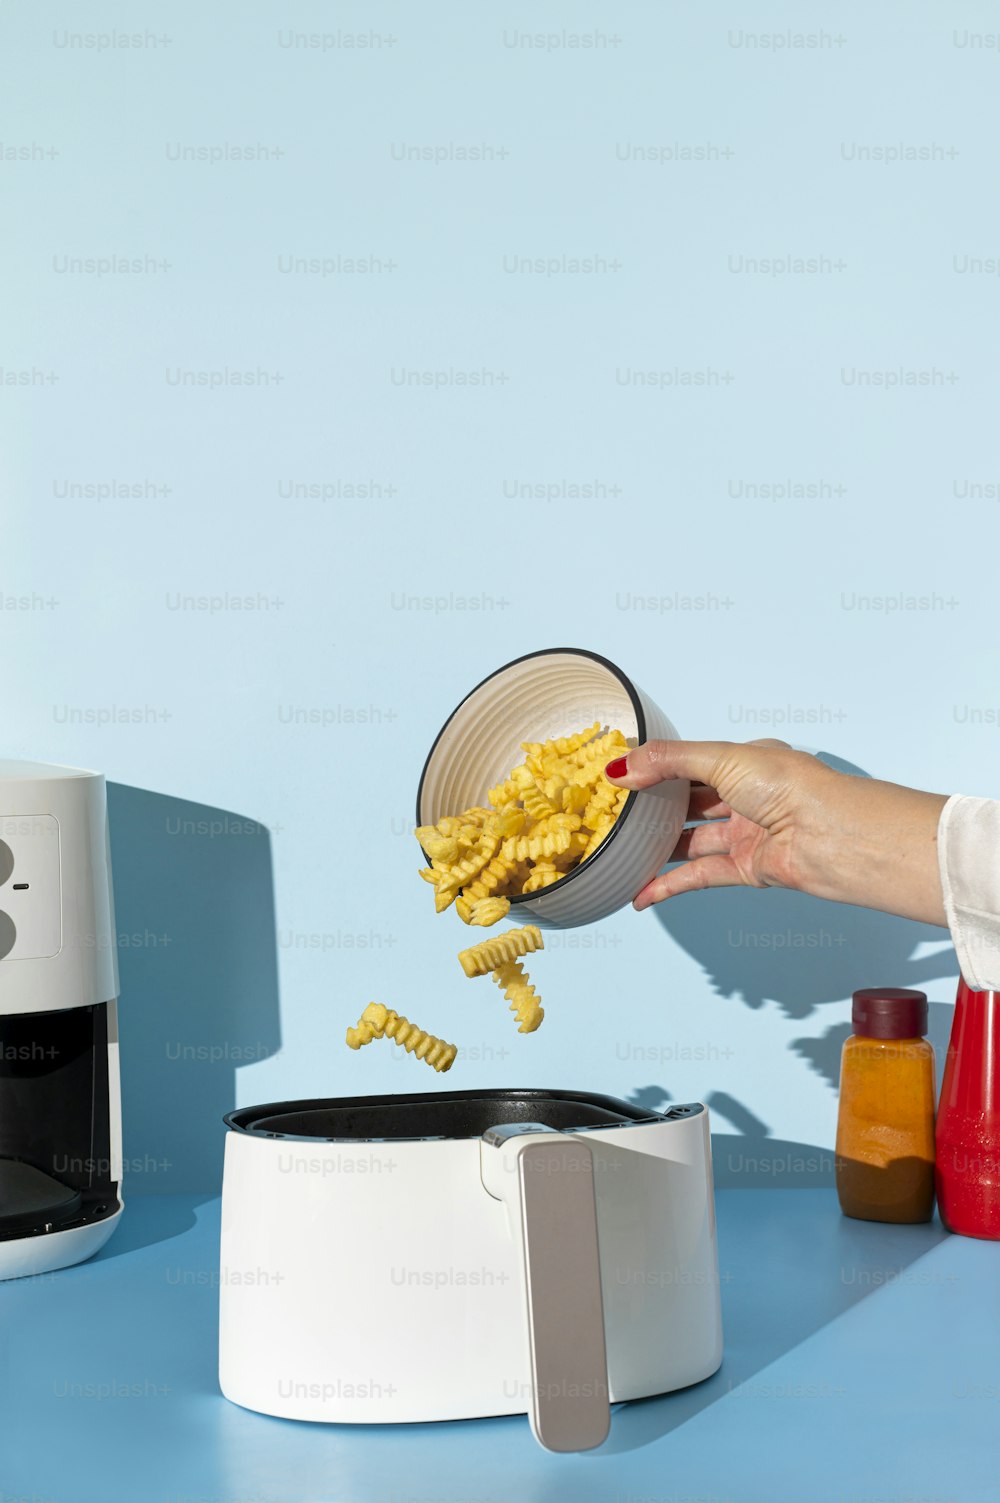 a person holding a bowl of food over a microwave